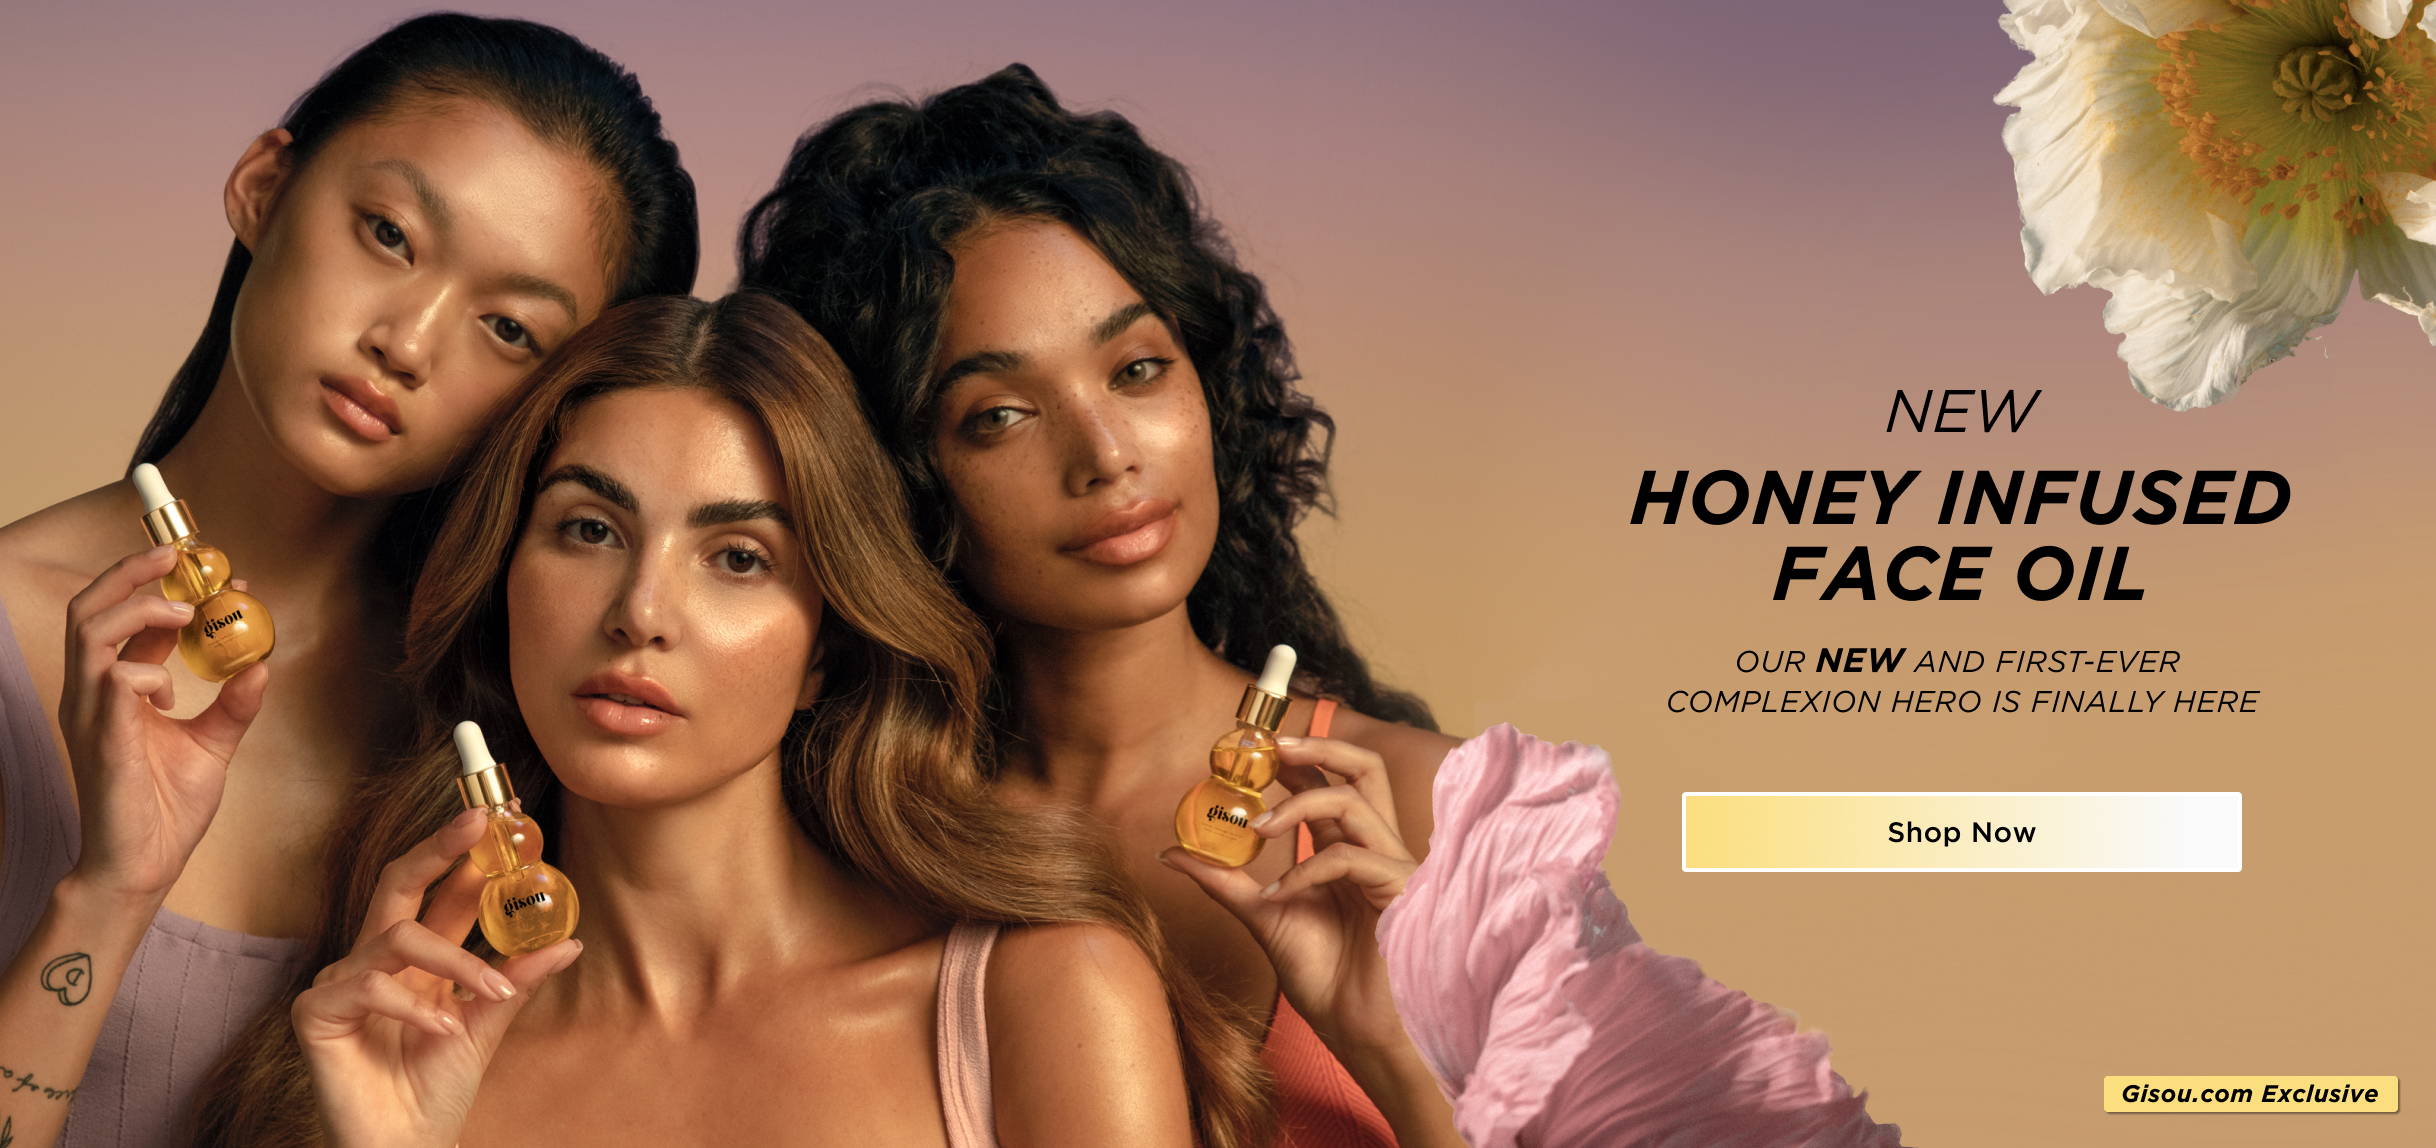 New Honey Infused Face Oil: Our New and first-ever complexion hero is finally here